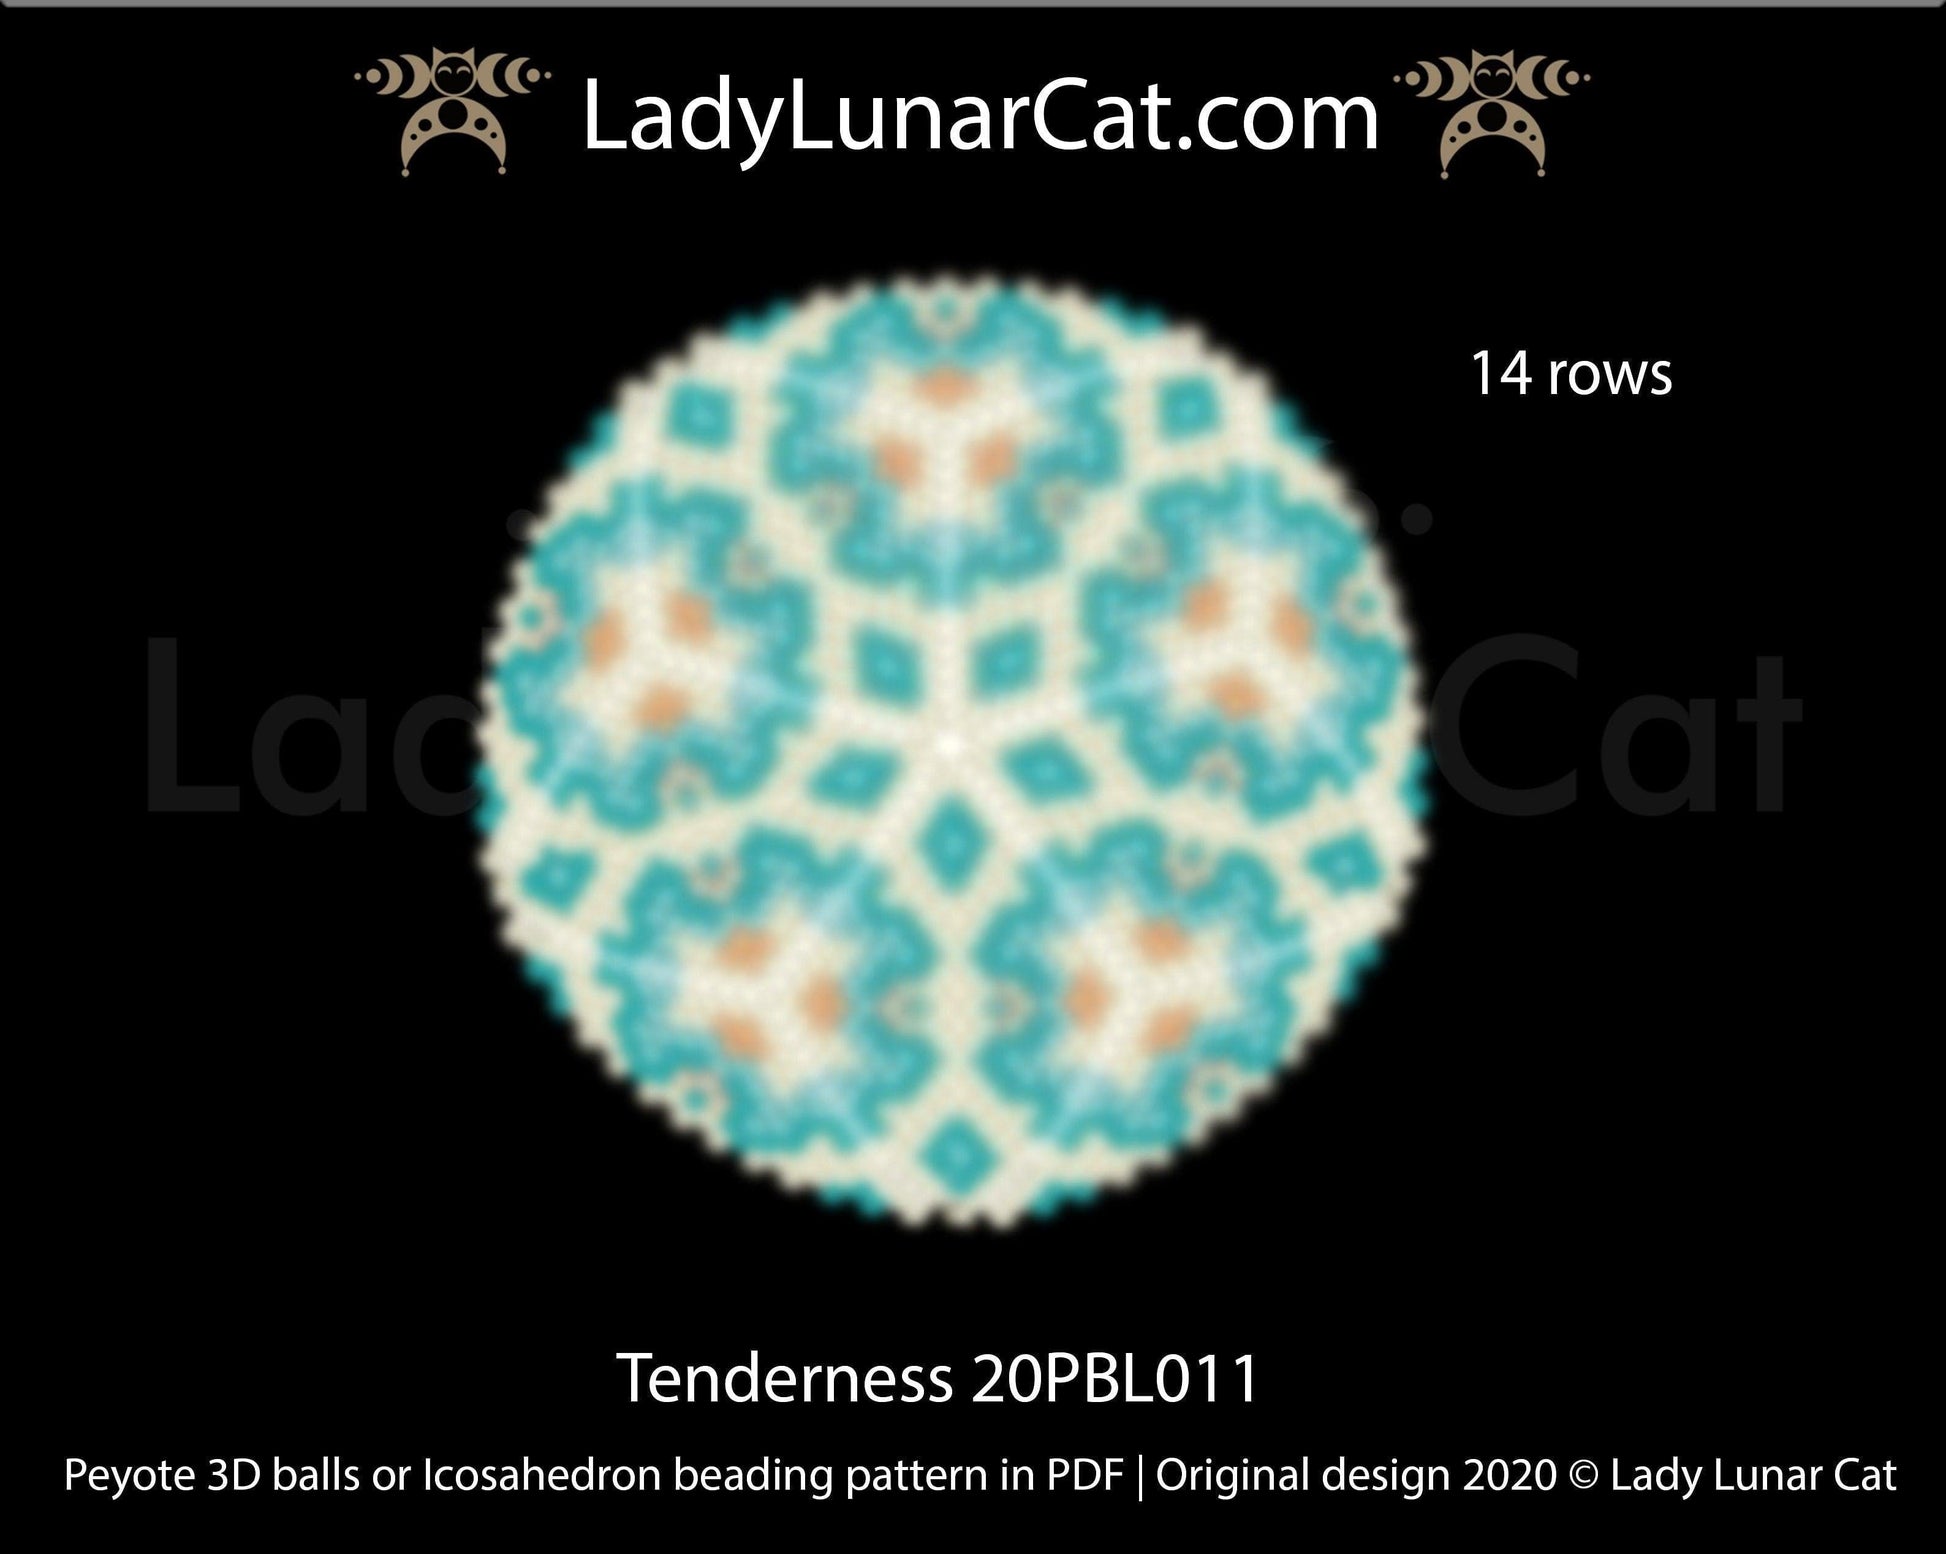 Peyote 3d ball pattern for beading | Beaded Icosahedron Tenderness 20PBL011 14 rows LadyLunarCat